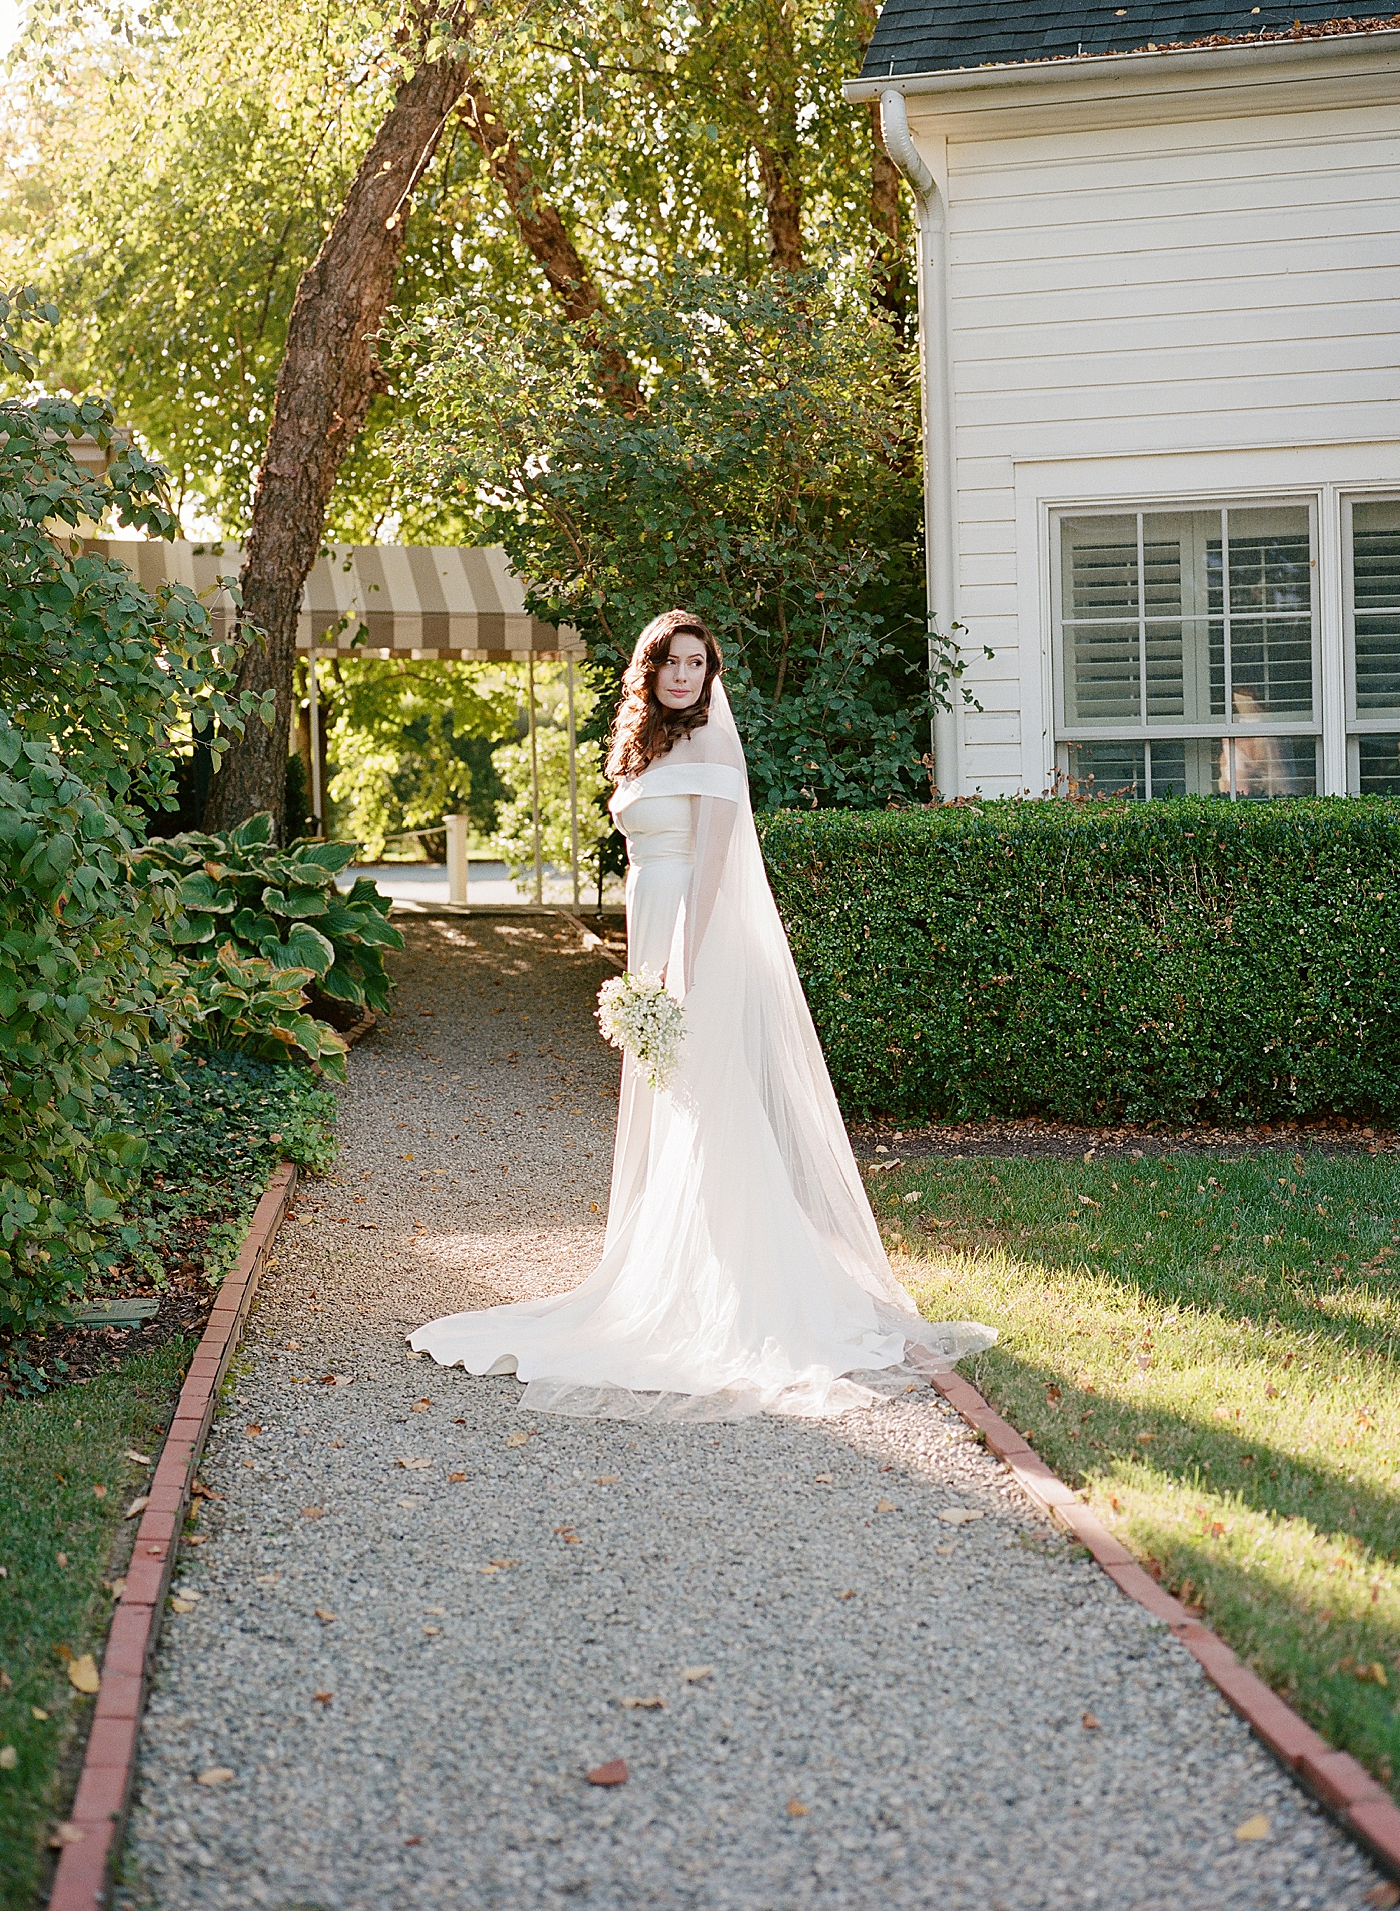 Bride standing on a path holding her bouquet | Photo by Hope Helmuth Photography